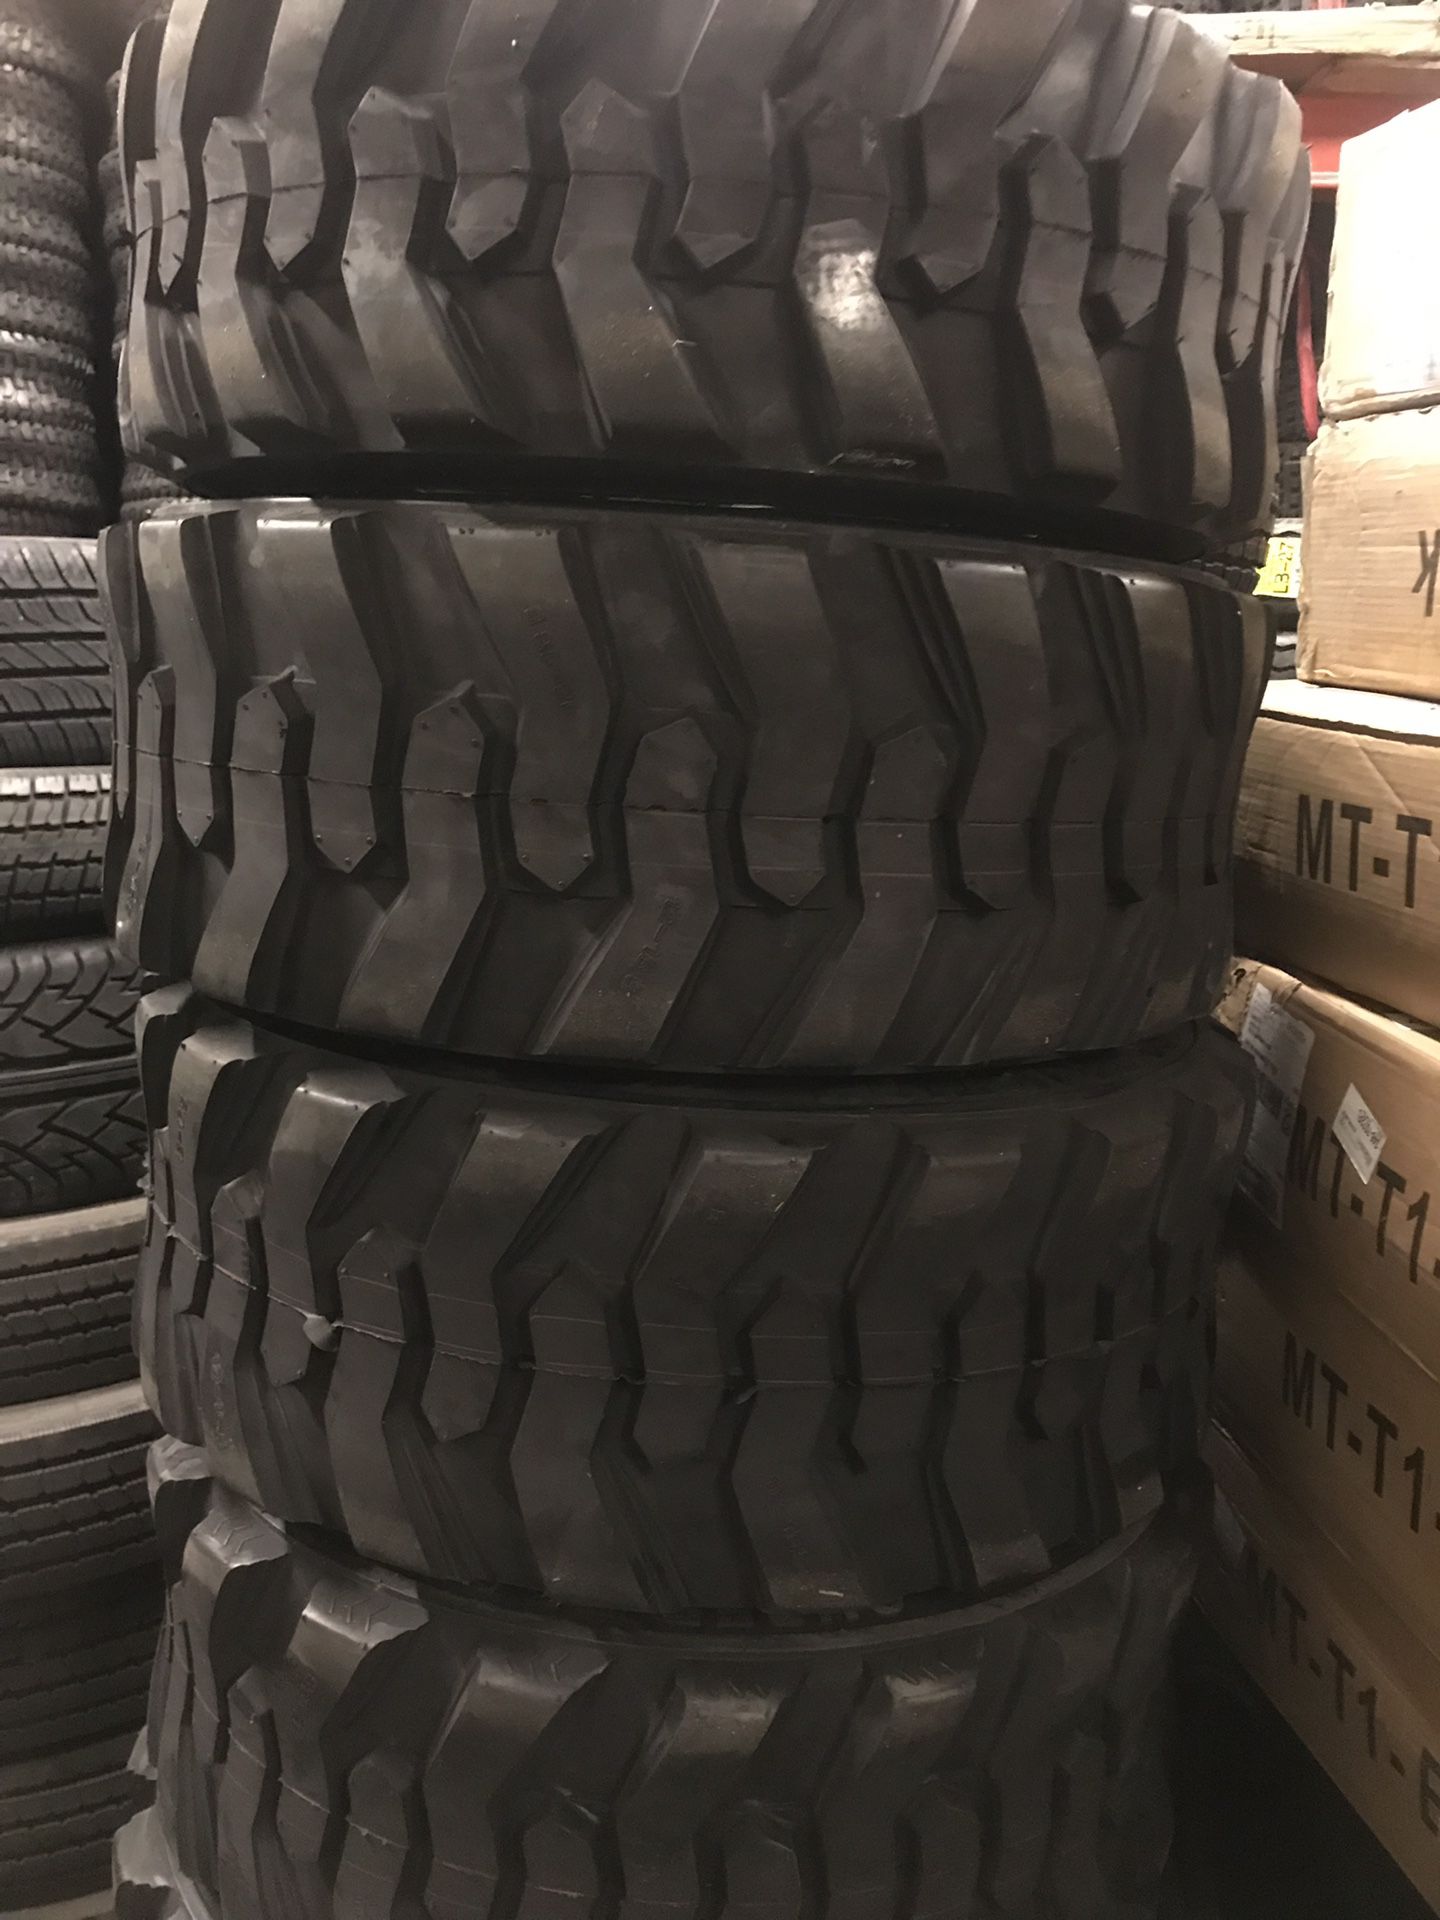 4x 10-16.5 12 ply skid steer tires $420 cash no lowball